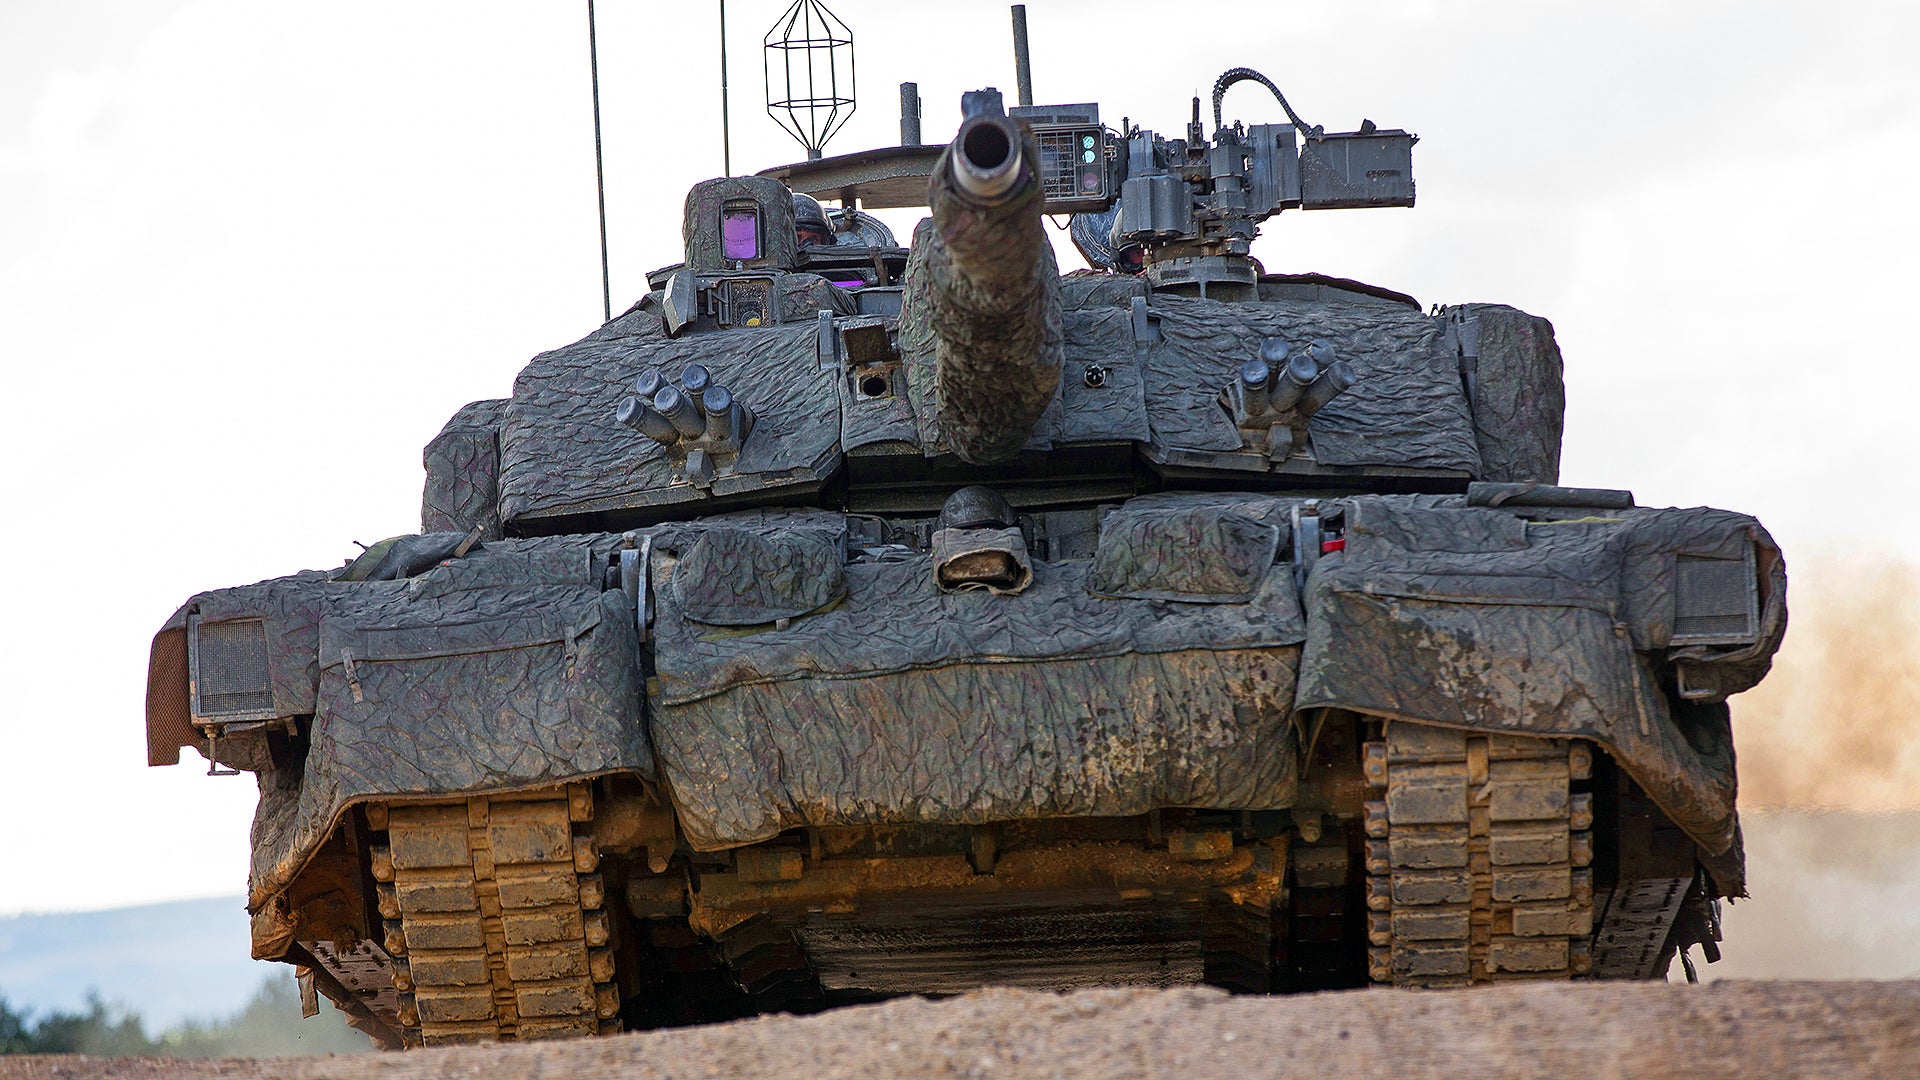 Pictured is the UK Main Battle Tank, Challenger 2 Theatre Entry Standard (CR2 TES) fitted with a Mobile Camouflage System (MCS). 

The tank is seen driving at high speed toward the camera.

This platform is the reference vehicle for the British Army and it is held at the Armoured Trials and Development Unit (ATDU) in Bovington. This tanks internal nickname is Megatron.

It is shown during testing at the Bovington test ground.